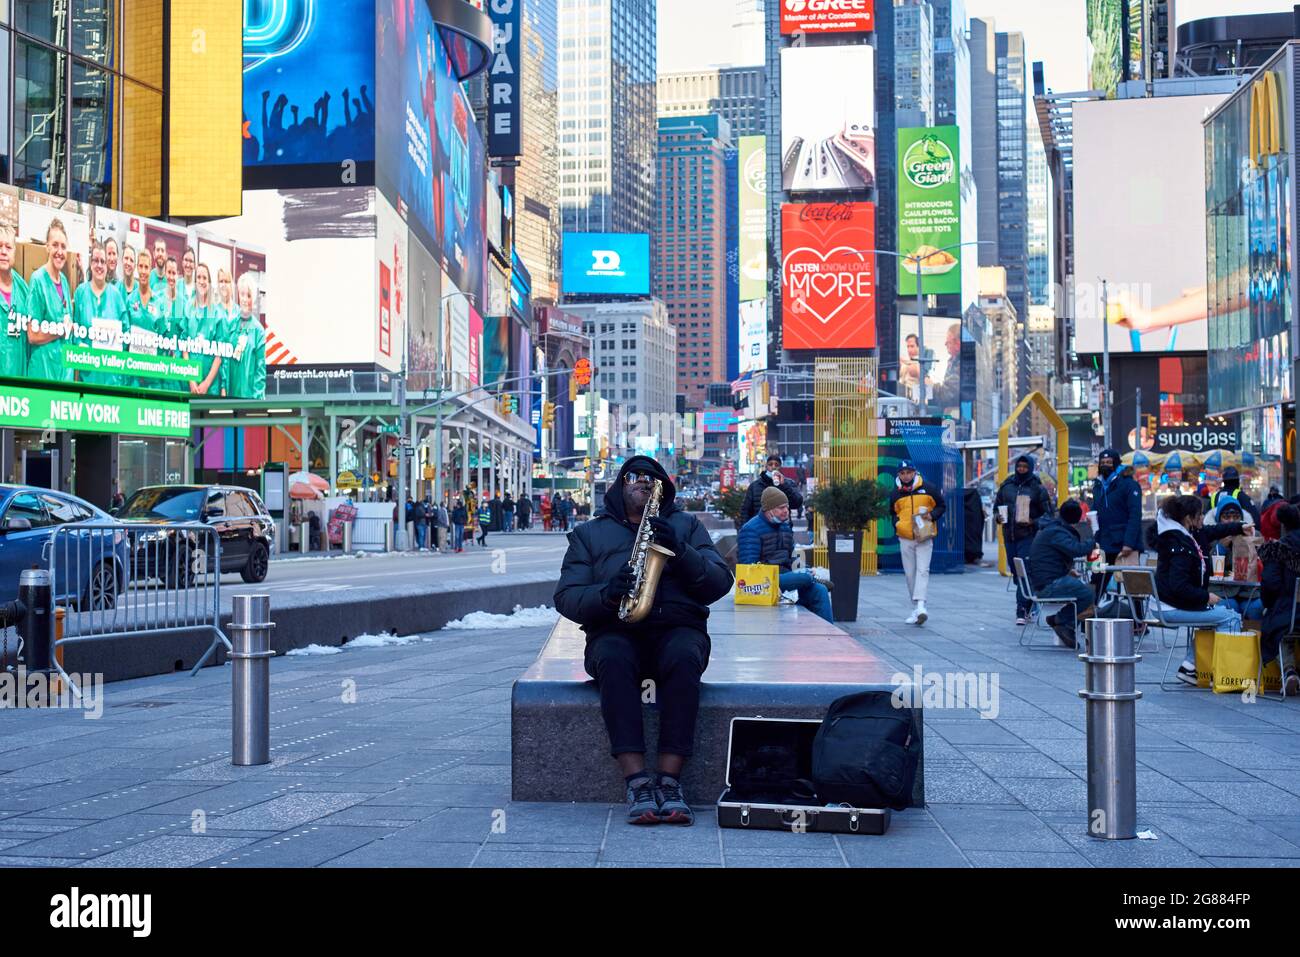 Street Photography of New York City, the people, the streets and the environment Stock Photo